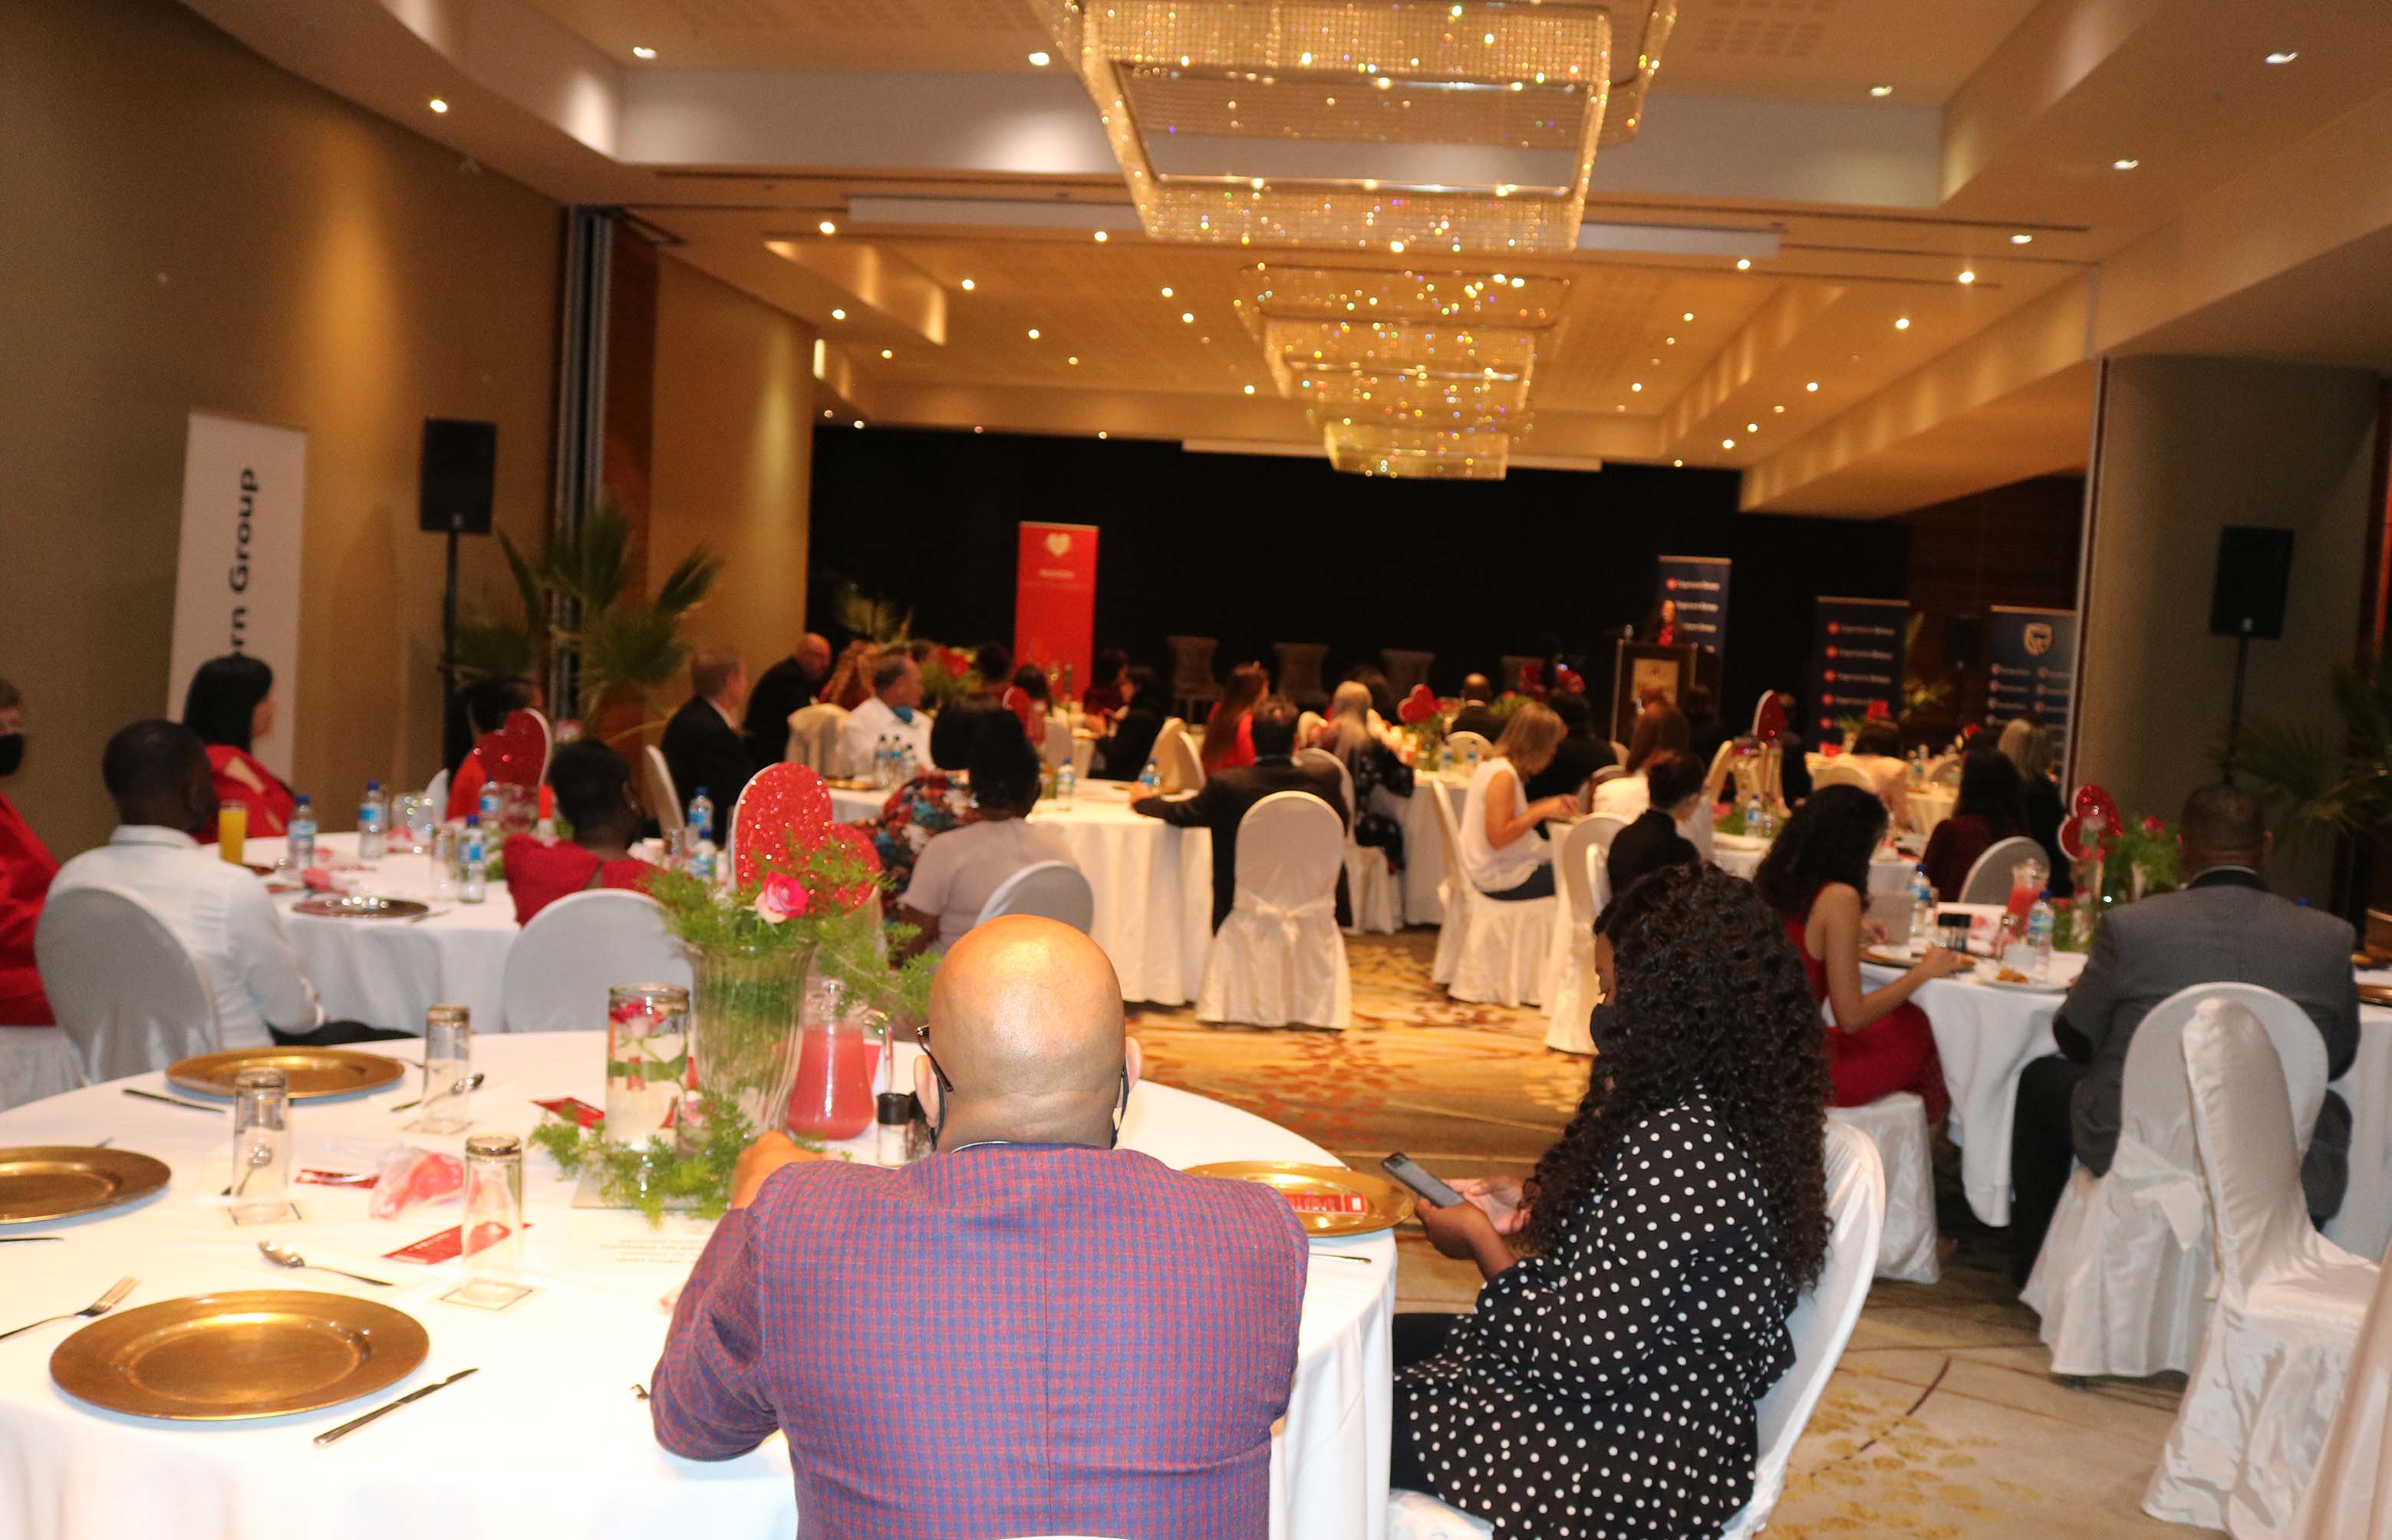 Attendees at the 2nd Annual Heart Health Fundraiser event.JPG